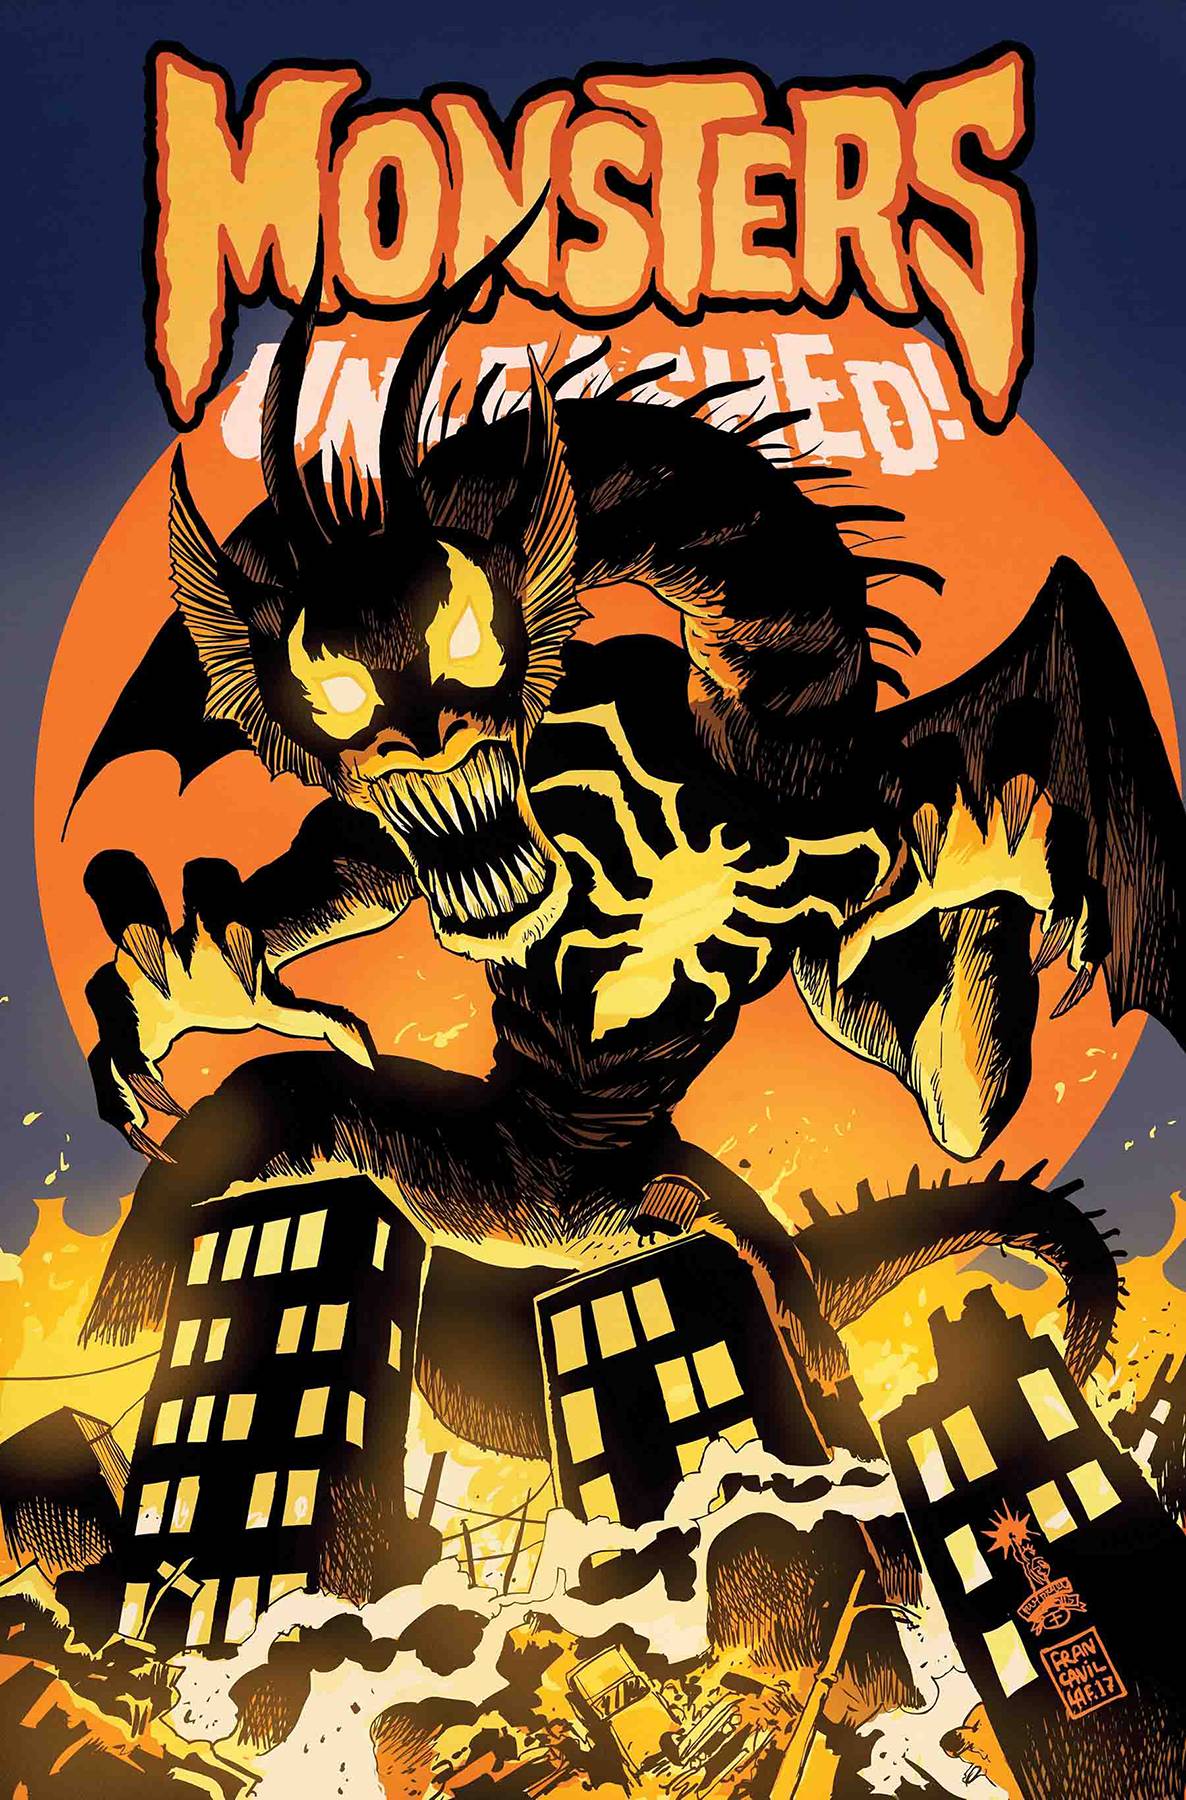 Monsters Unleashed #6 Veonomized Fin Fang Foom Variant